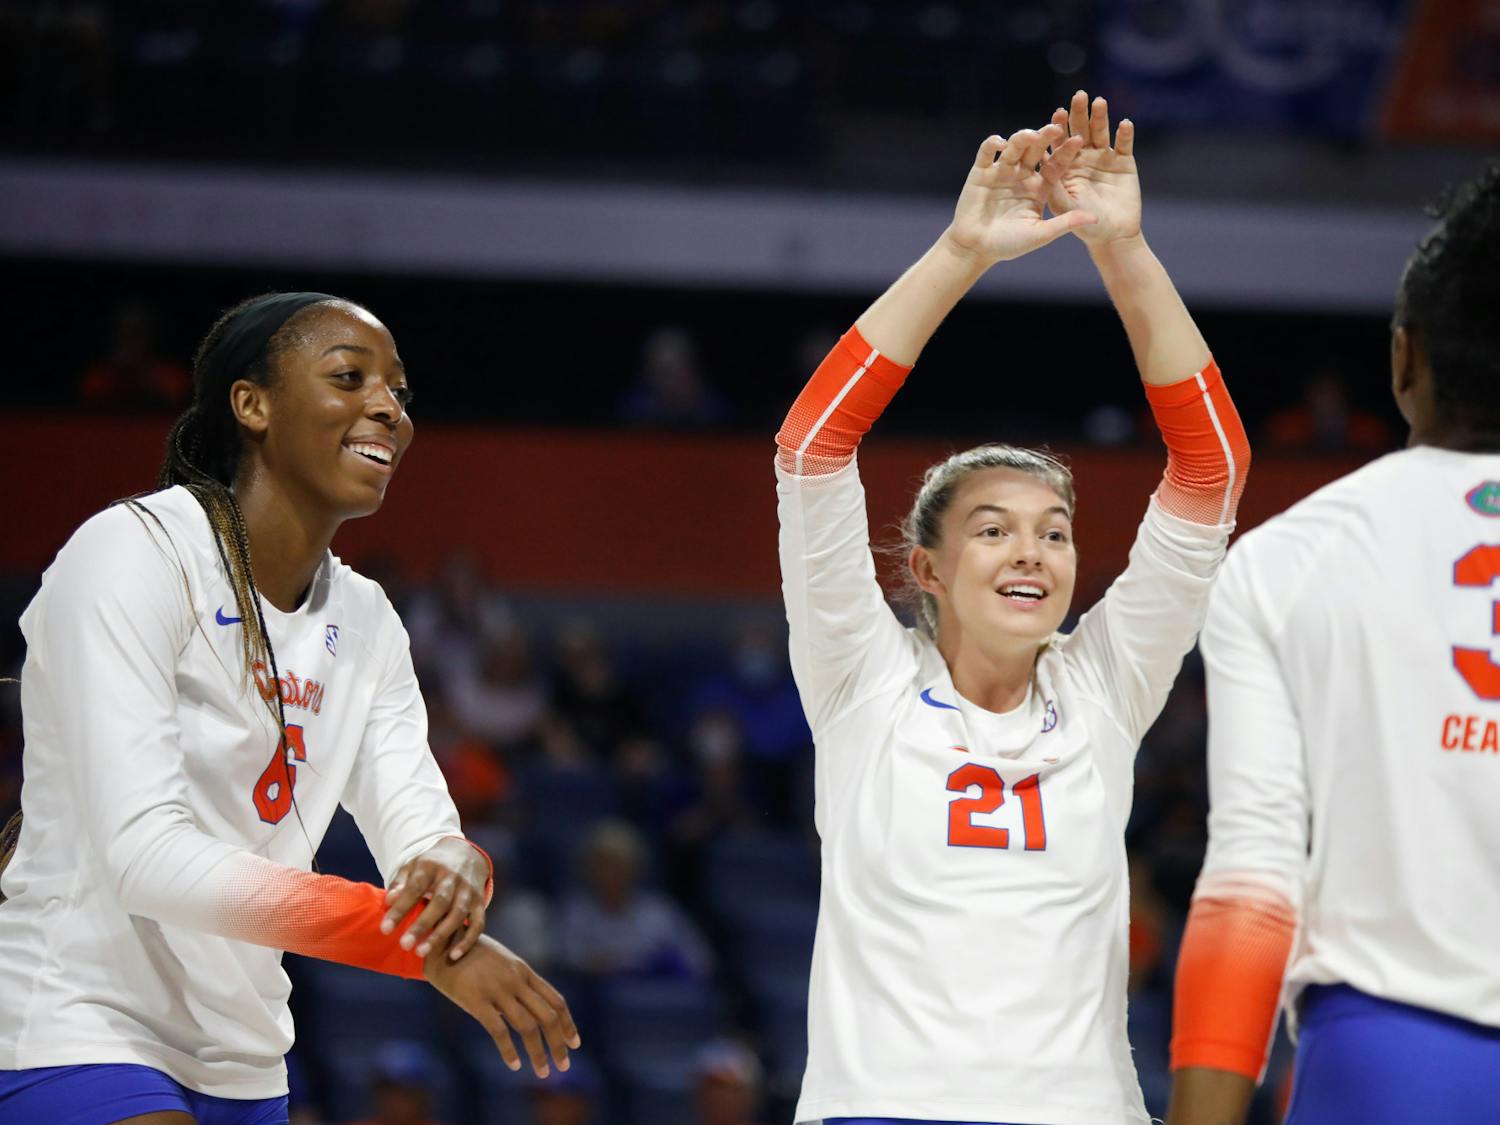 Florida volleyball players Marlie Monserez (21), Nnedi Okammor (6) and T'ara Ceaser celebrate during a game against Mississippi State on Sept. 24.